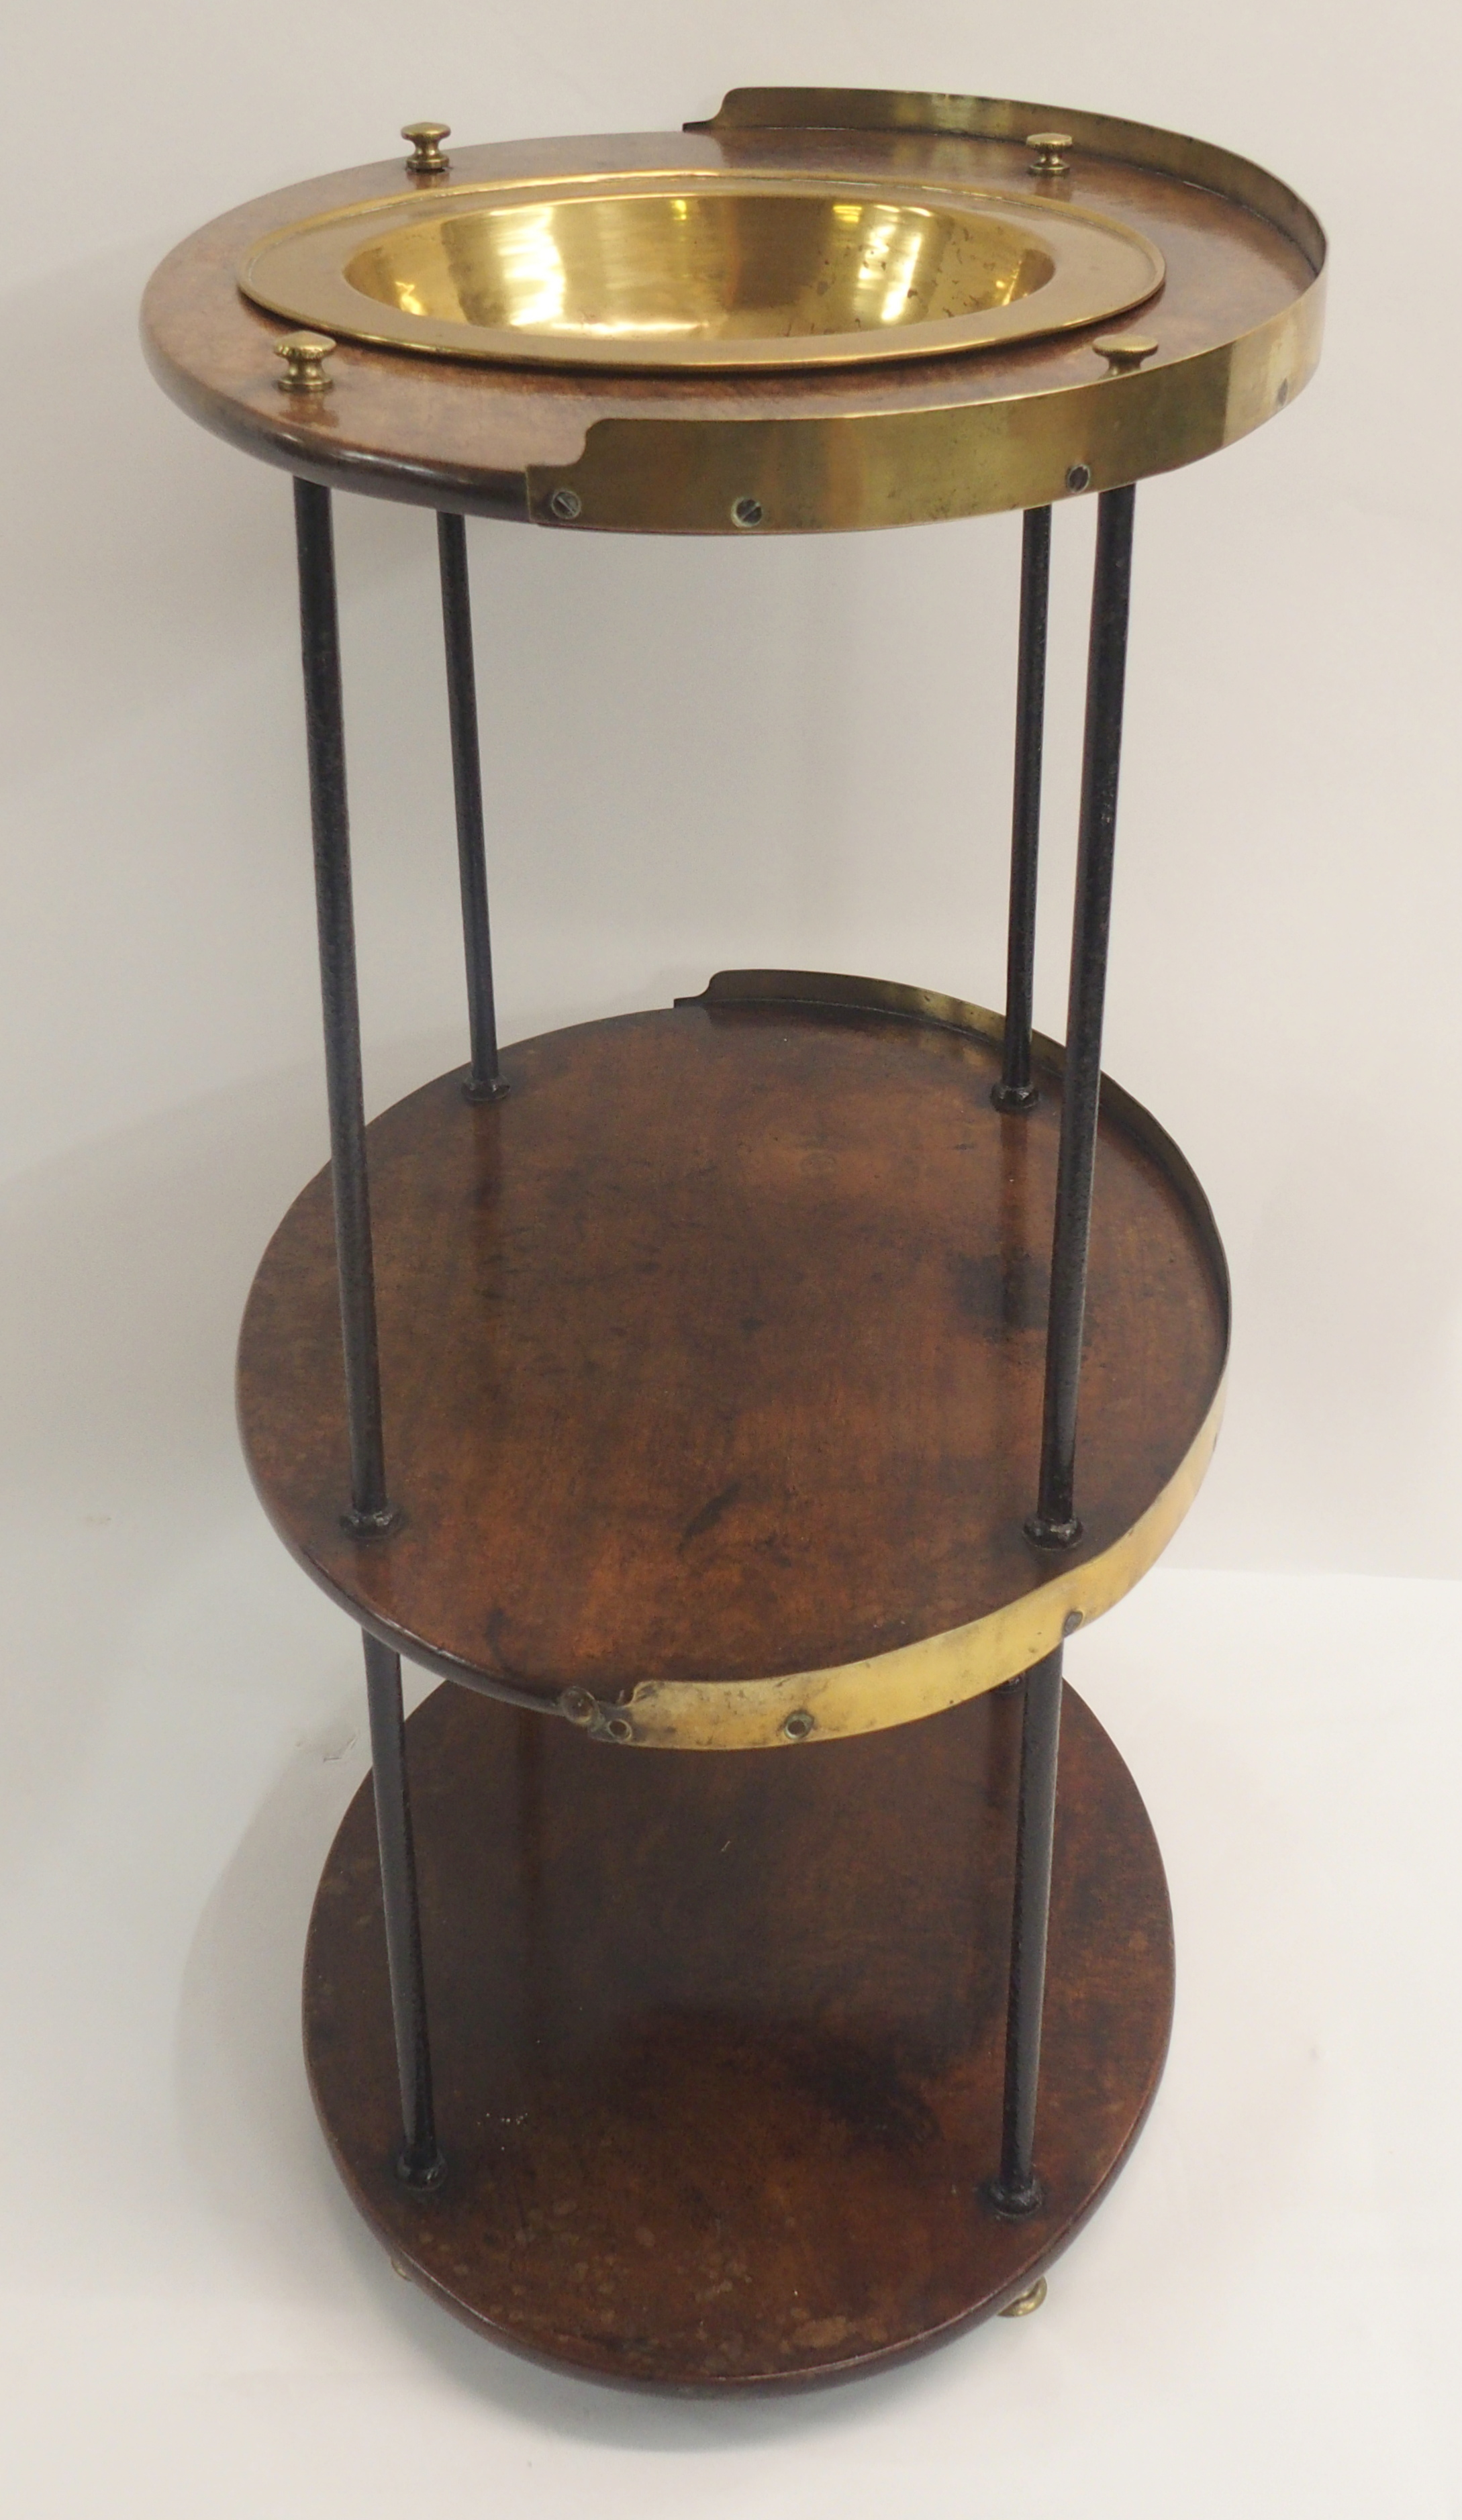 A 19TH CENTURY BRITISH MILITARY OFFICERS CAMPAIGN WASH STAND the three-tiered teak and brass mounted - Image 2 of 11